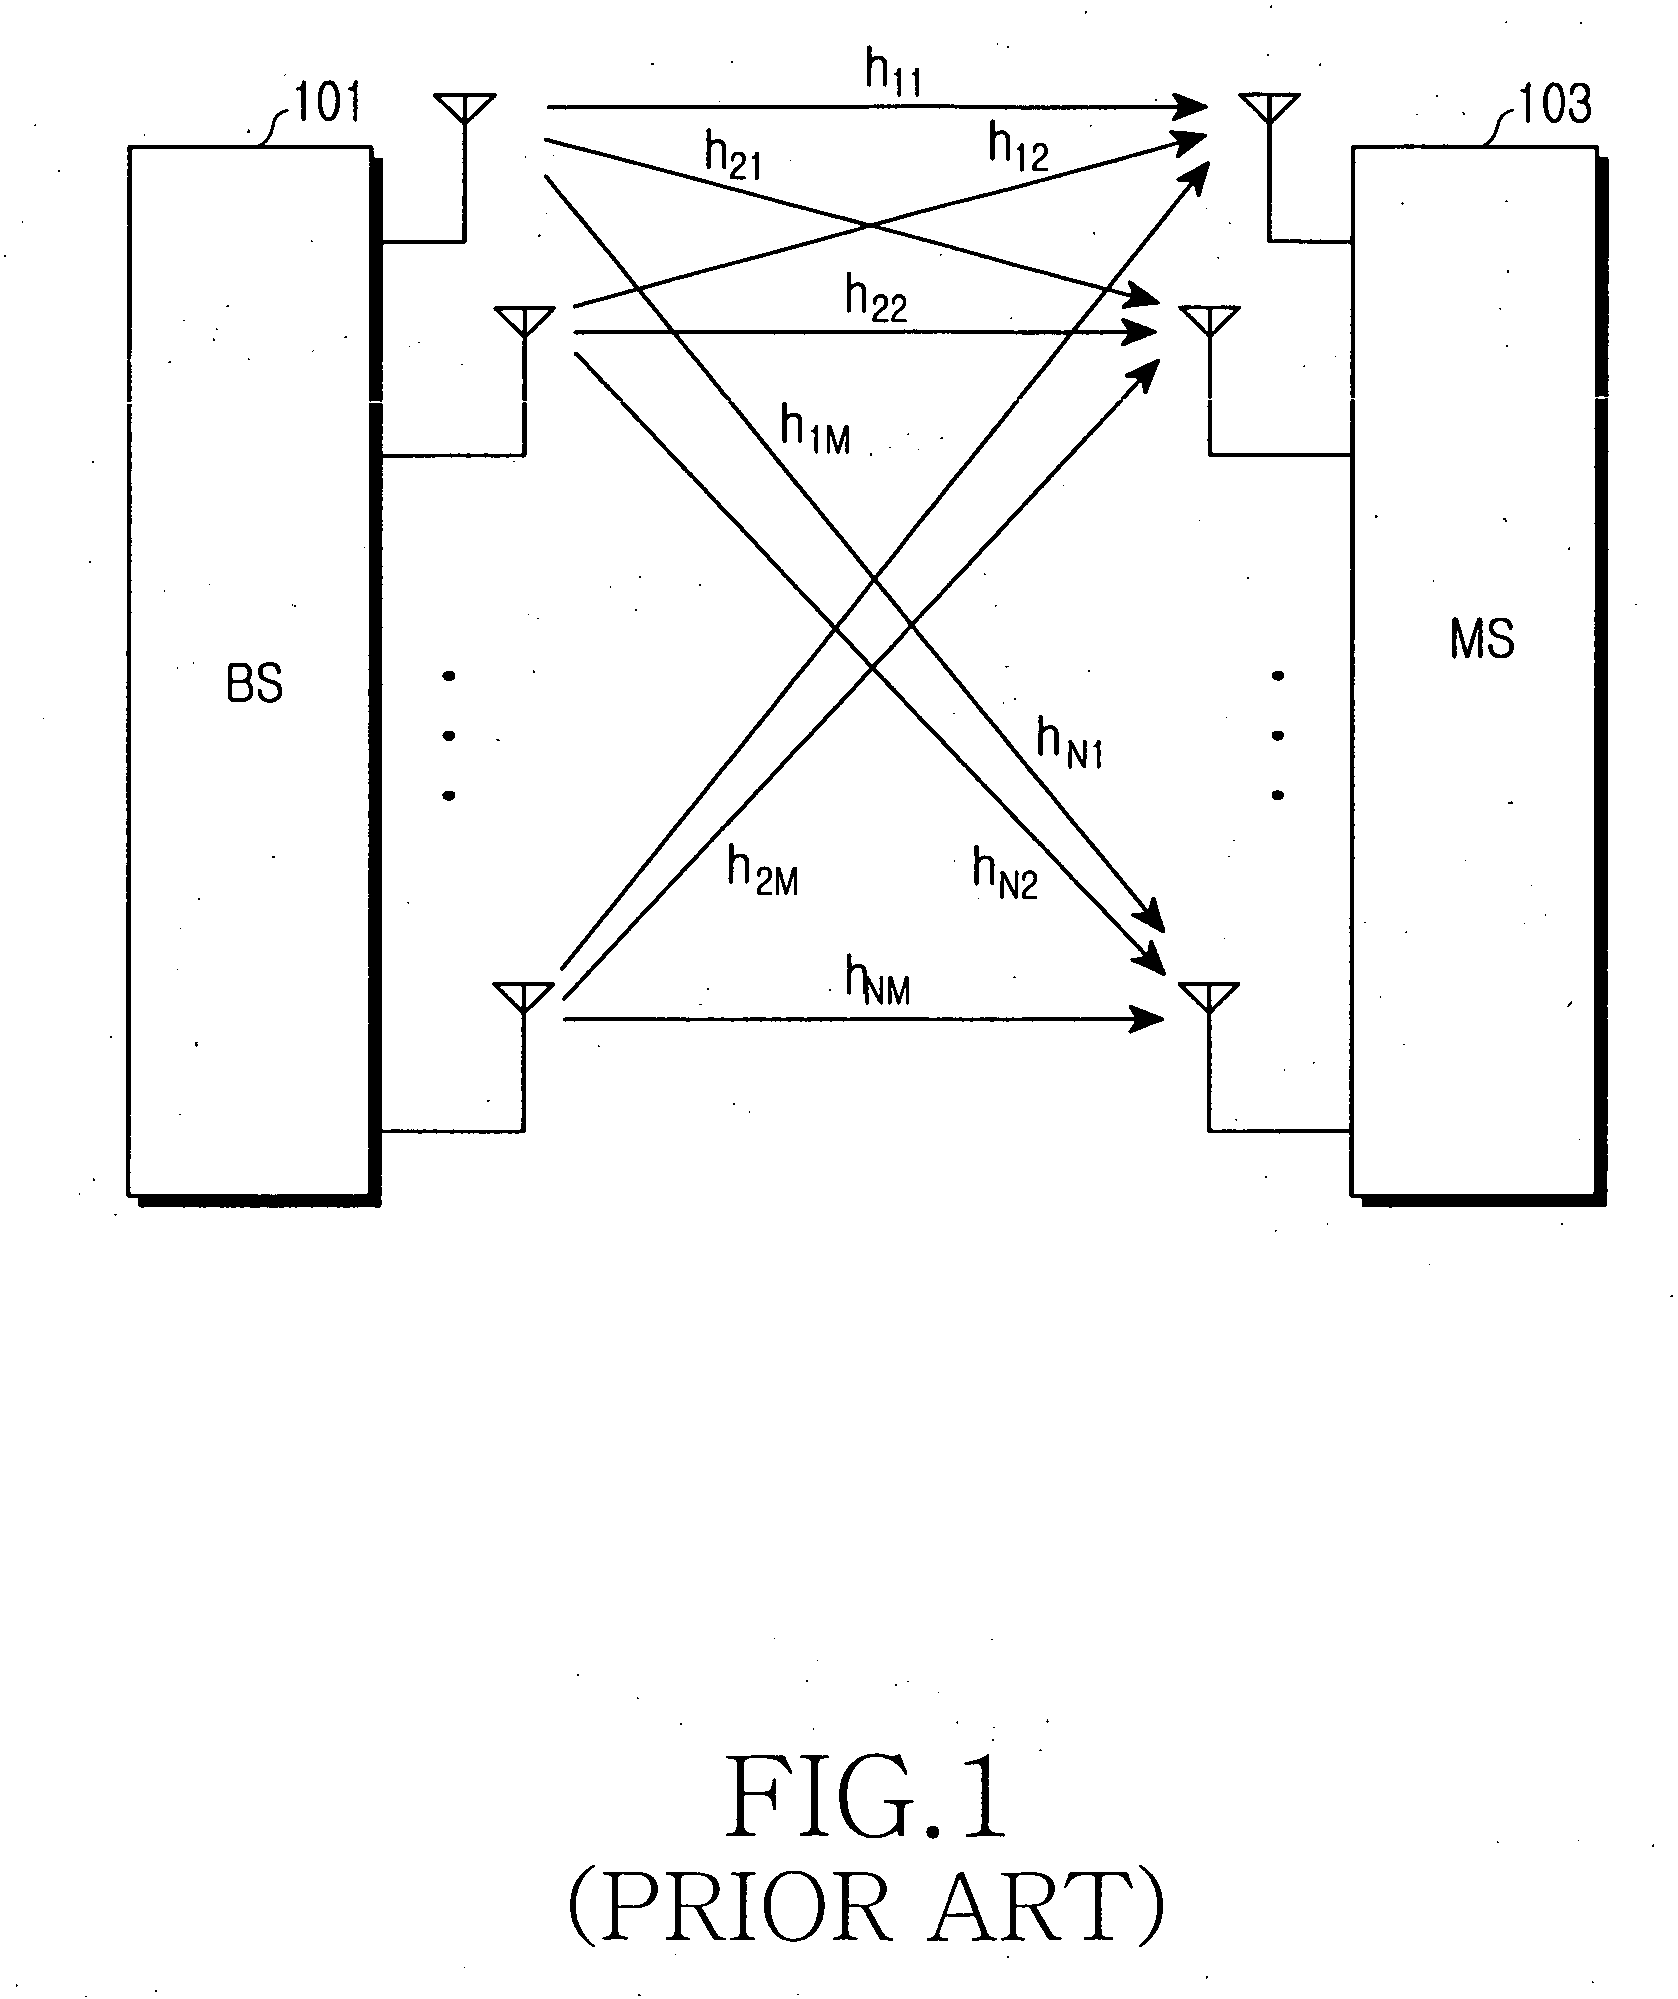 Scheduling apparatus and method in a communication system